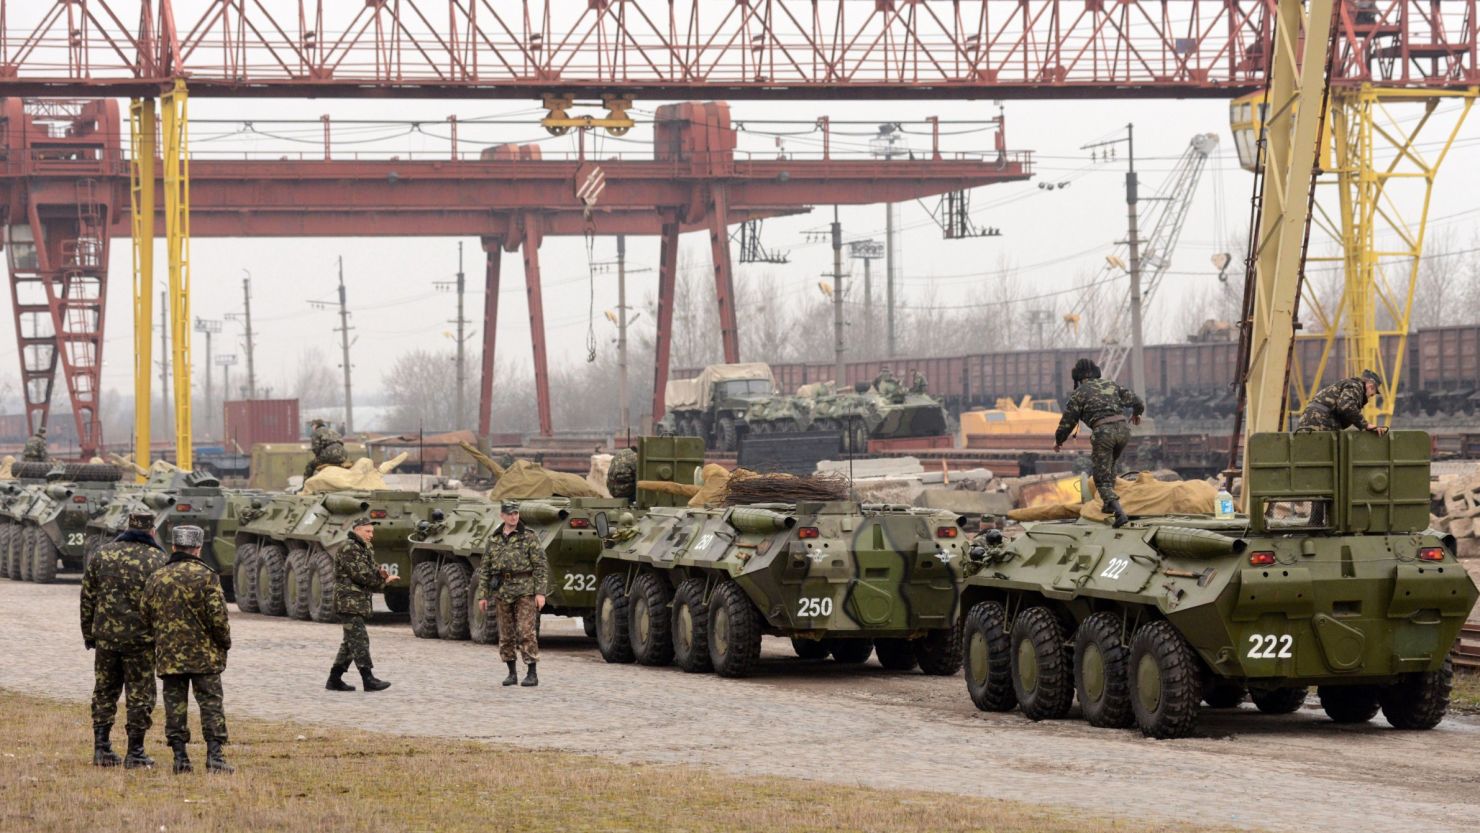 Ukrainian soldiers load armed personnel carriers into boxcars in the western Ukrainian city of Lviv on March 8.